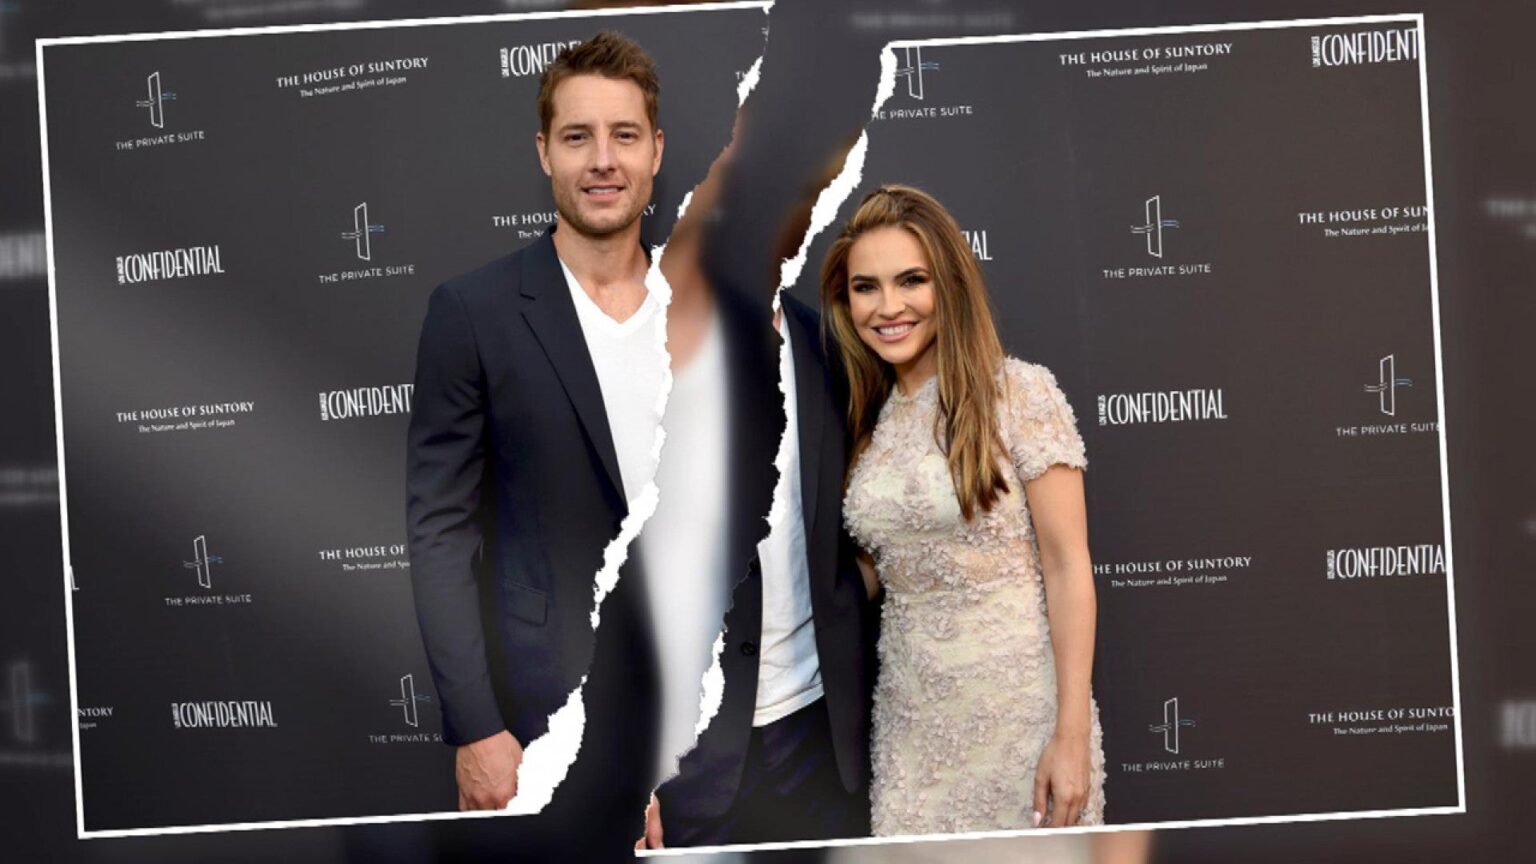 Did you know the bigger, juicier controversy surrounding Chrishell Stause and Justin Hartley's divorce? Here’s a timeline to recap all events.